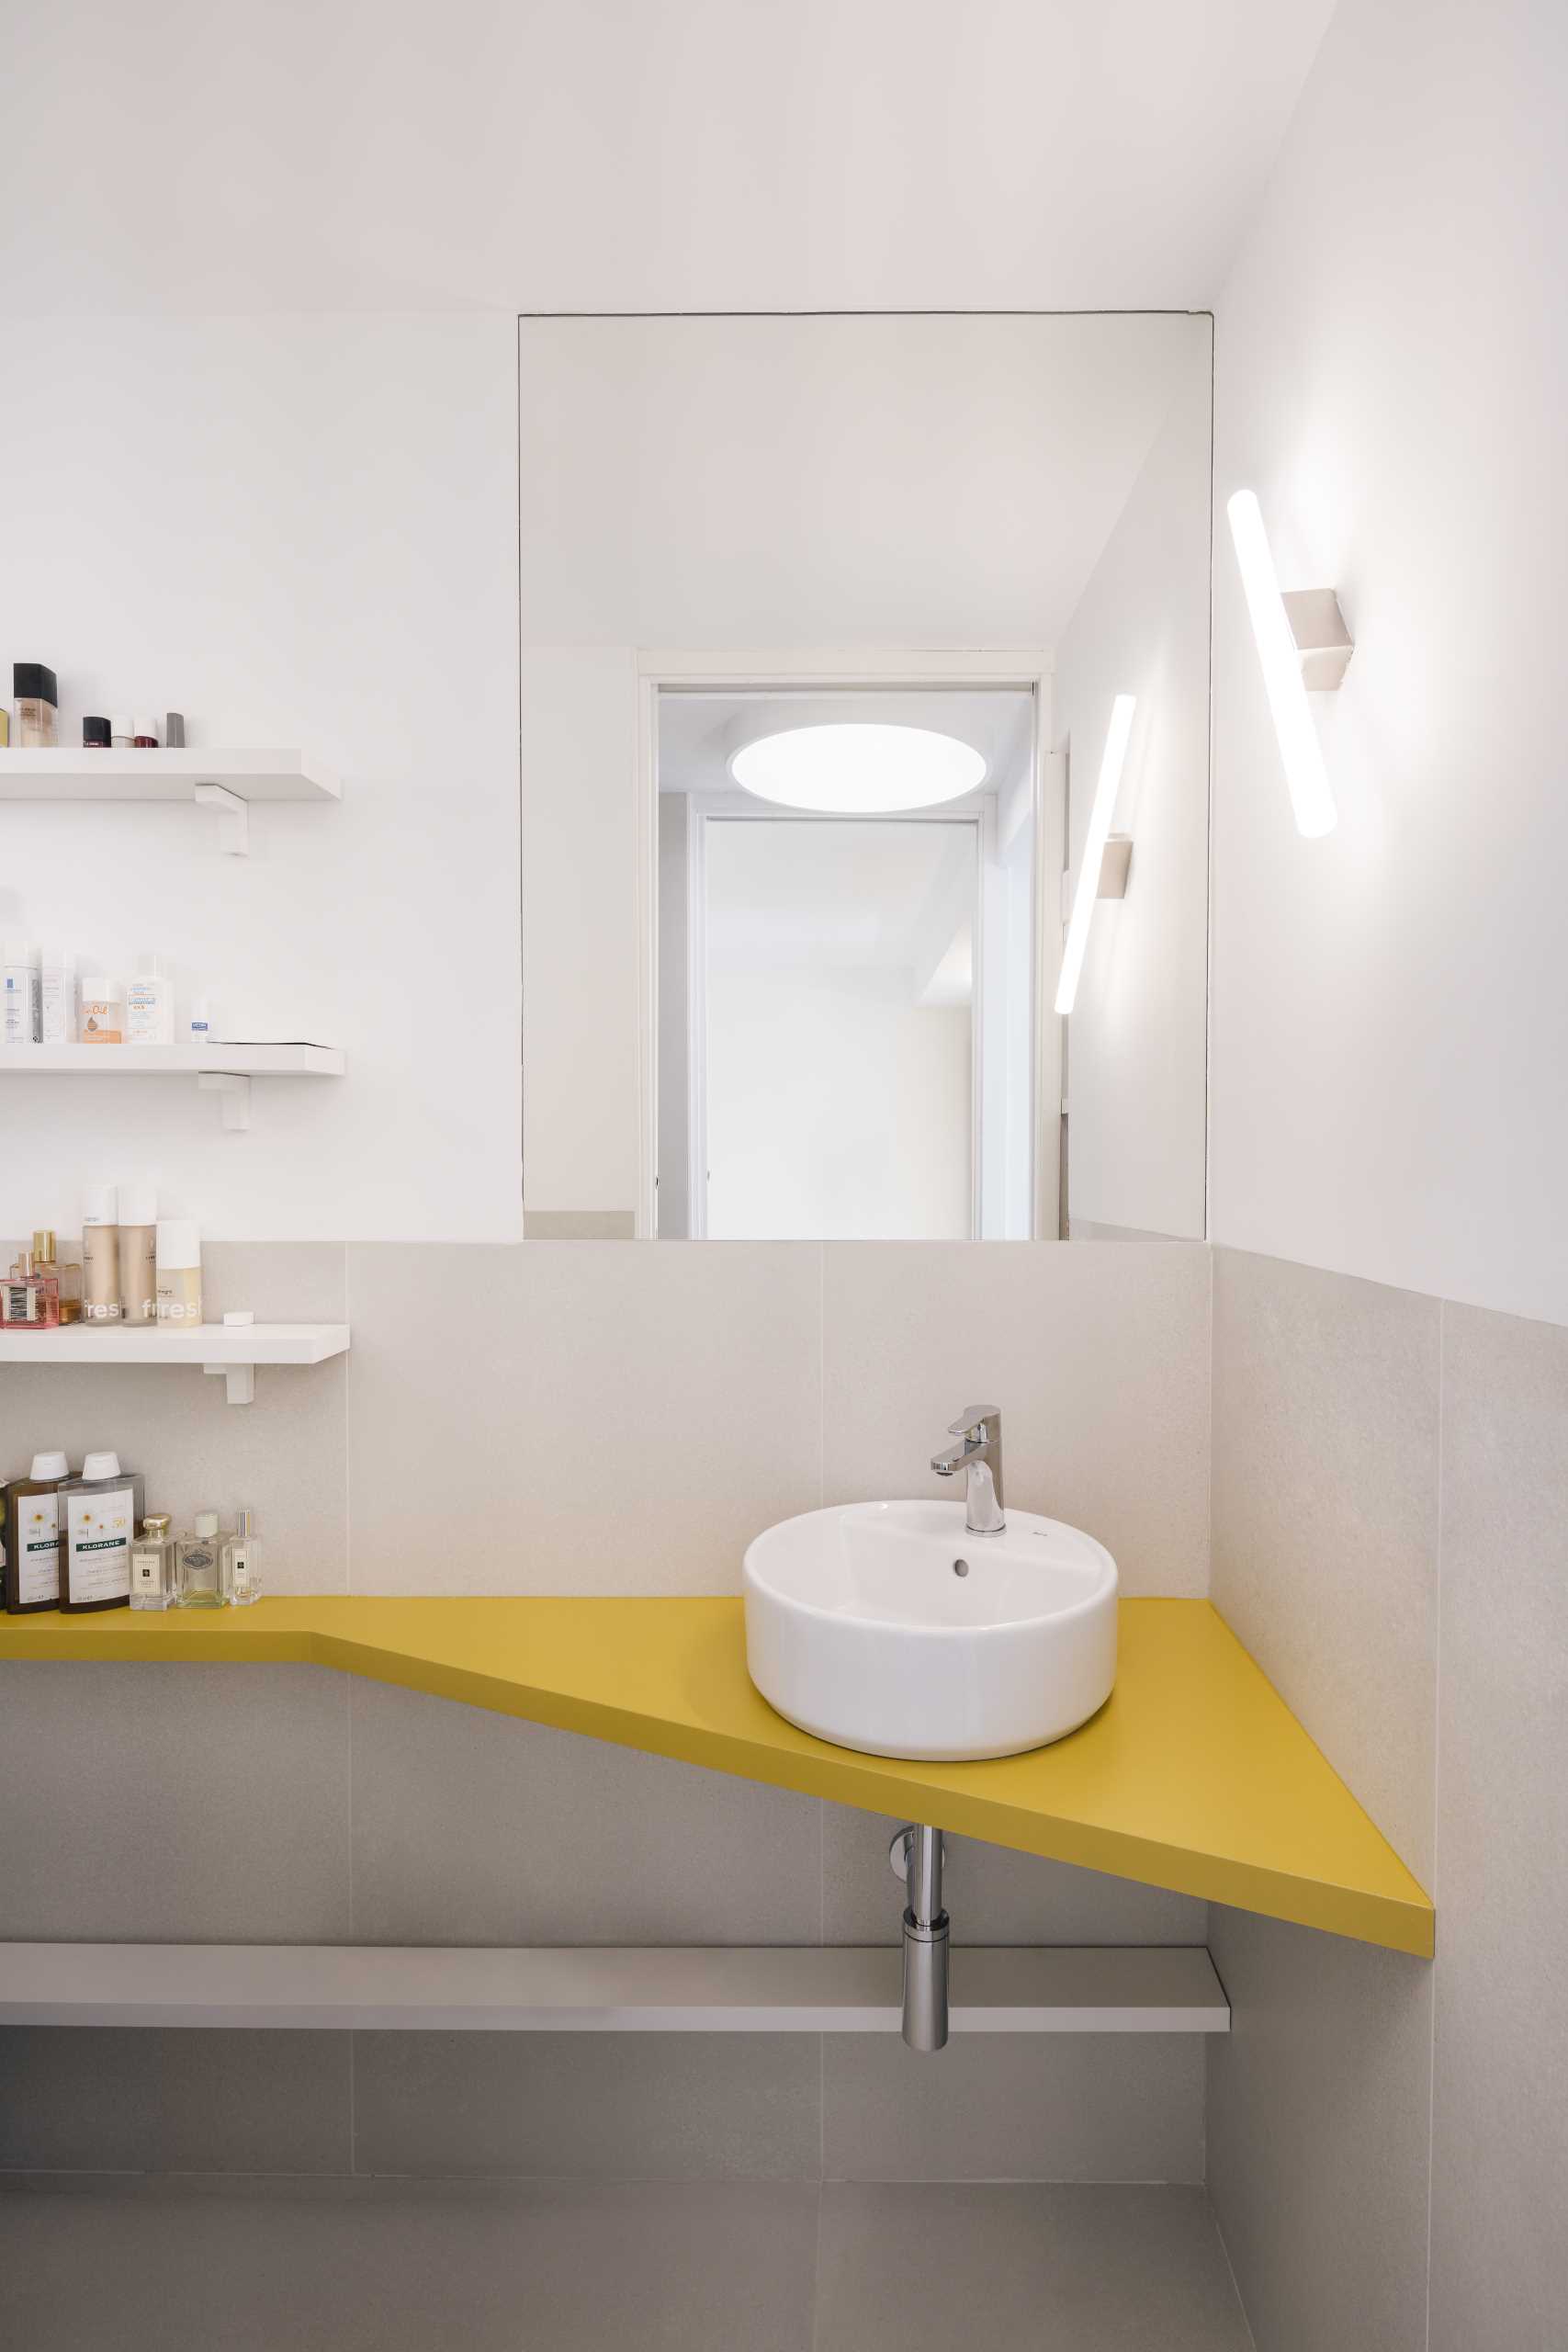 A small bathroom includes a bright yellow vanity.